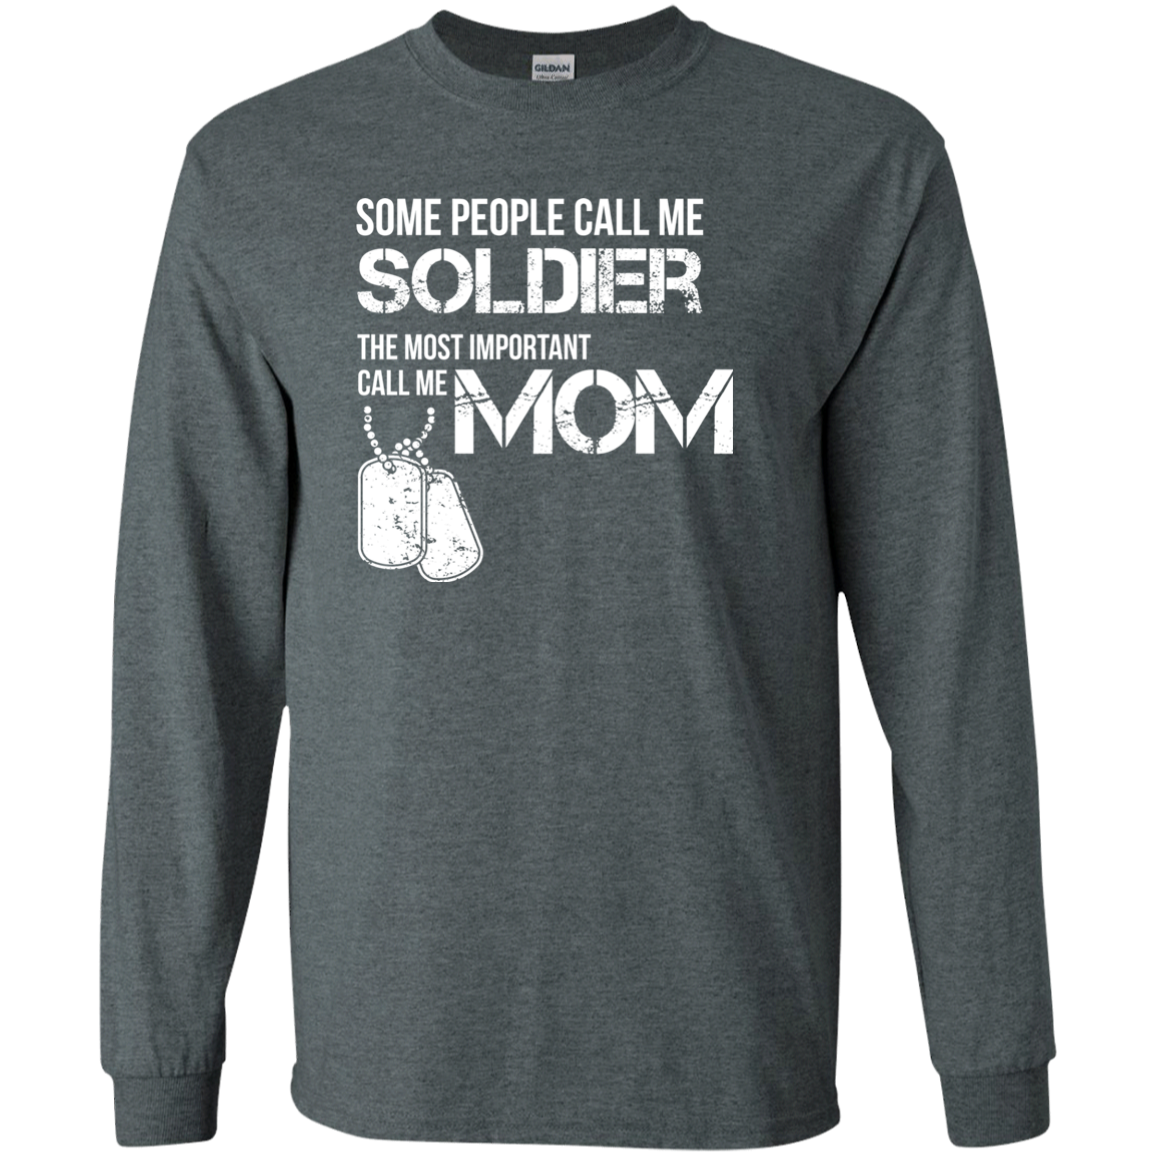 Some People Call Me Soldier Mom